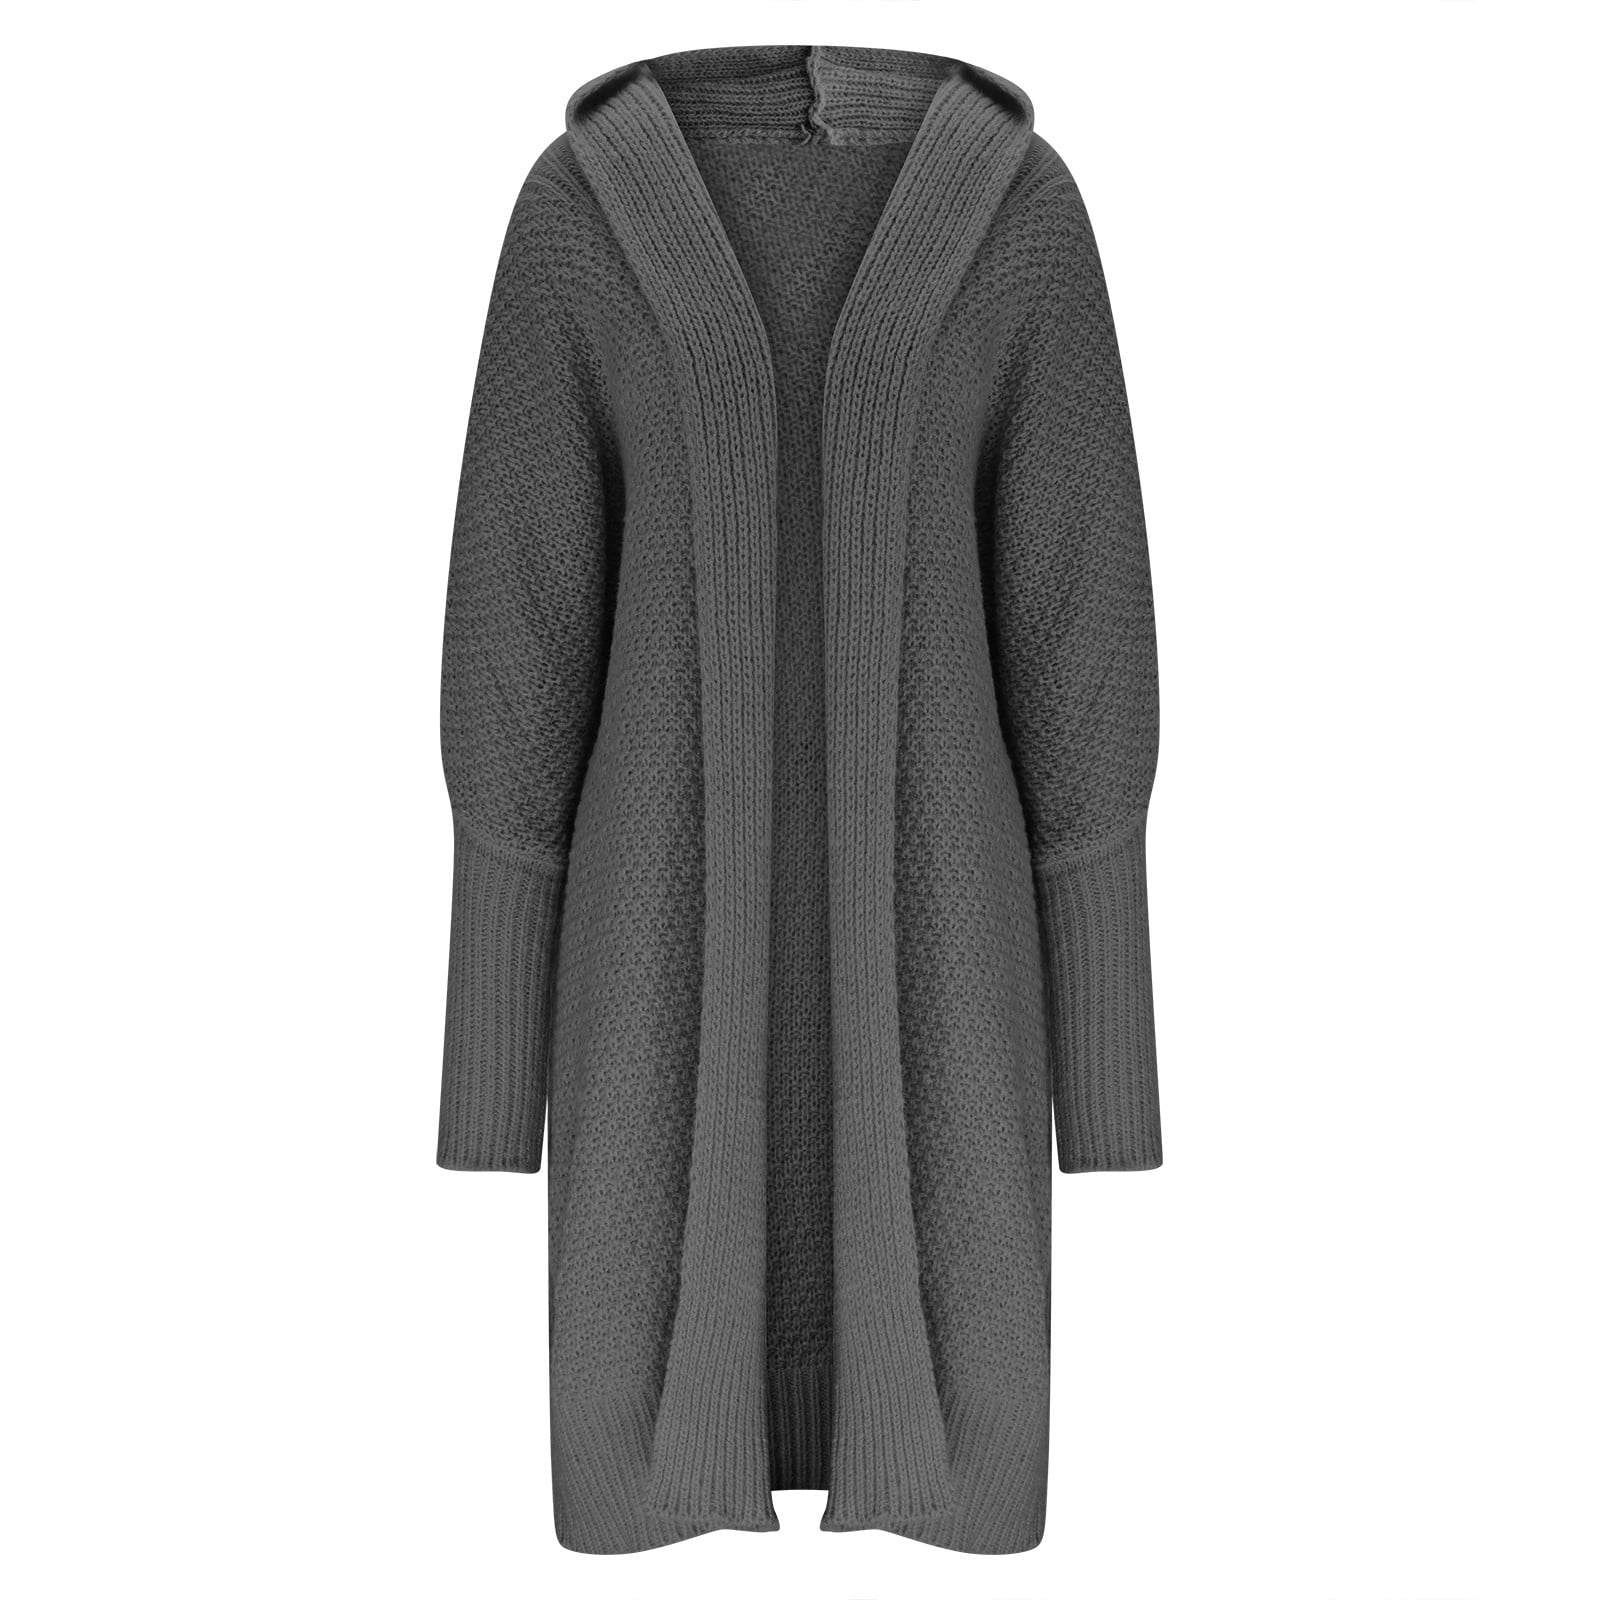  FQZWONG Gray Long Cardigan Sweaters for Women Chunky Knit Long  Sleeve Solid Color Oversized Open Front Lightweight Plus Size Comfy Loose  Soft Warm Party club Outdoor Coat Outwear(Gray,Large) : Sports 